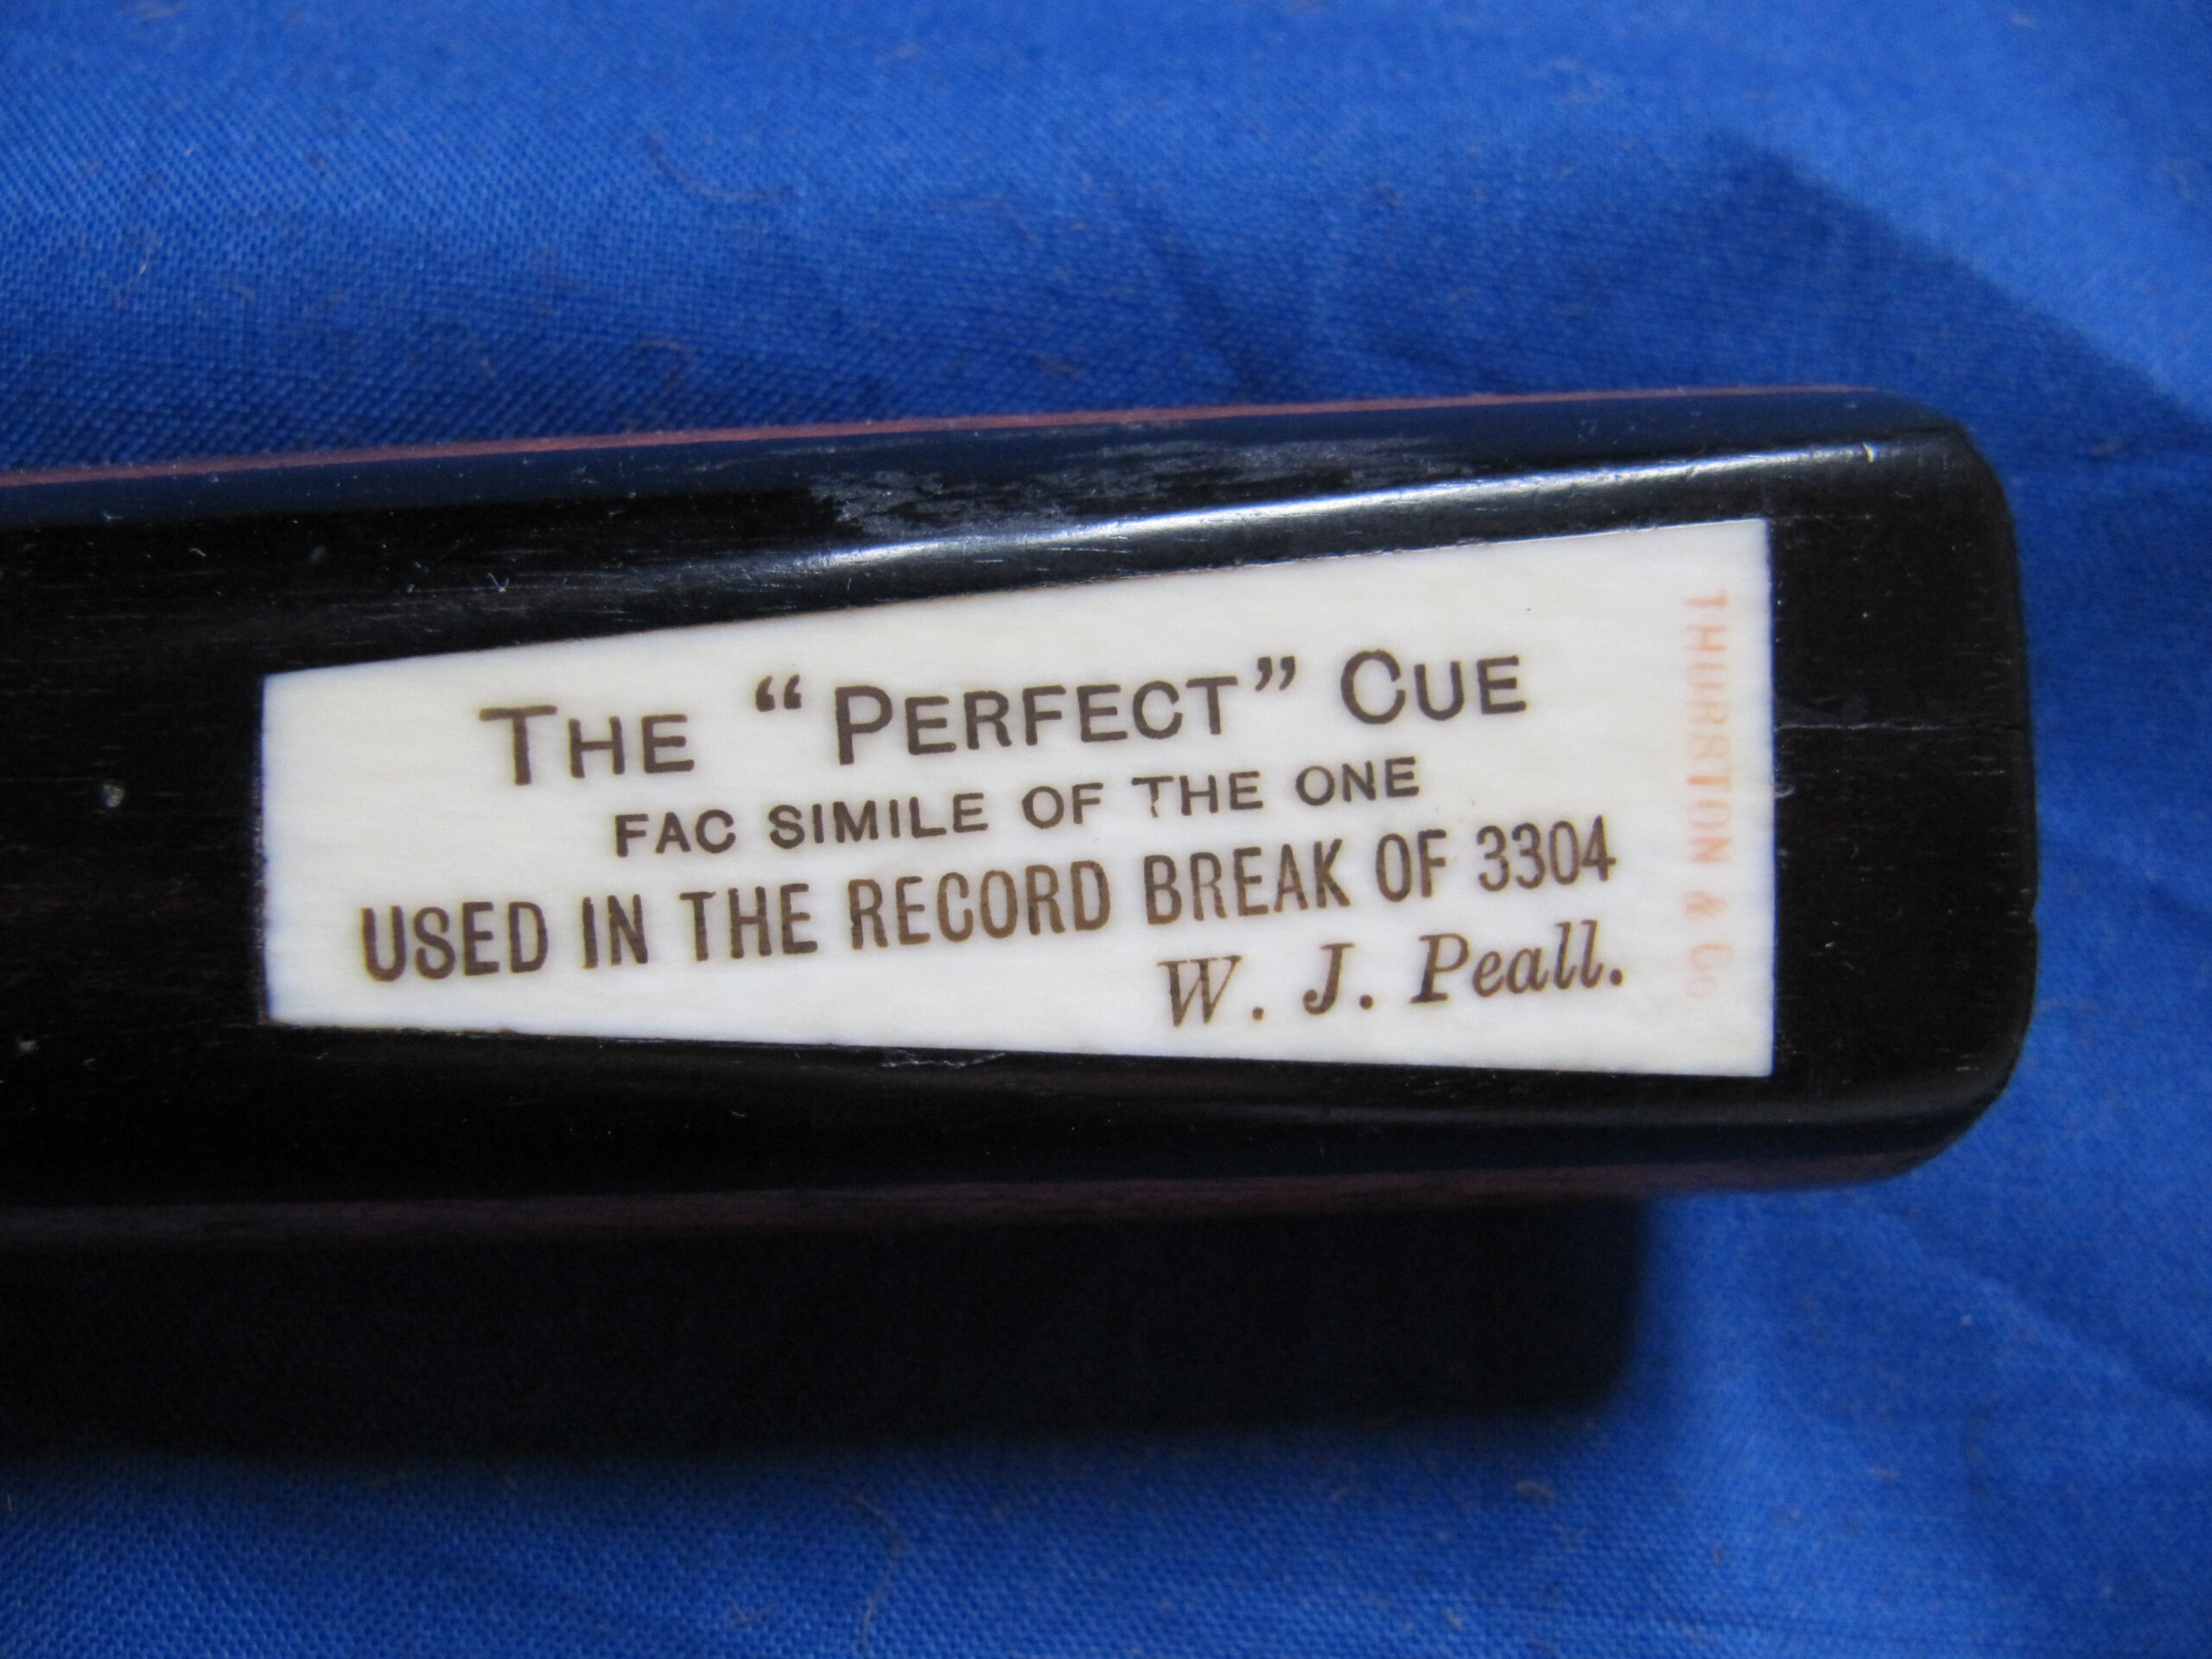 Peall “Perfect” cue